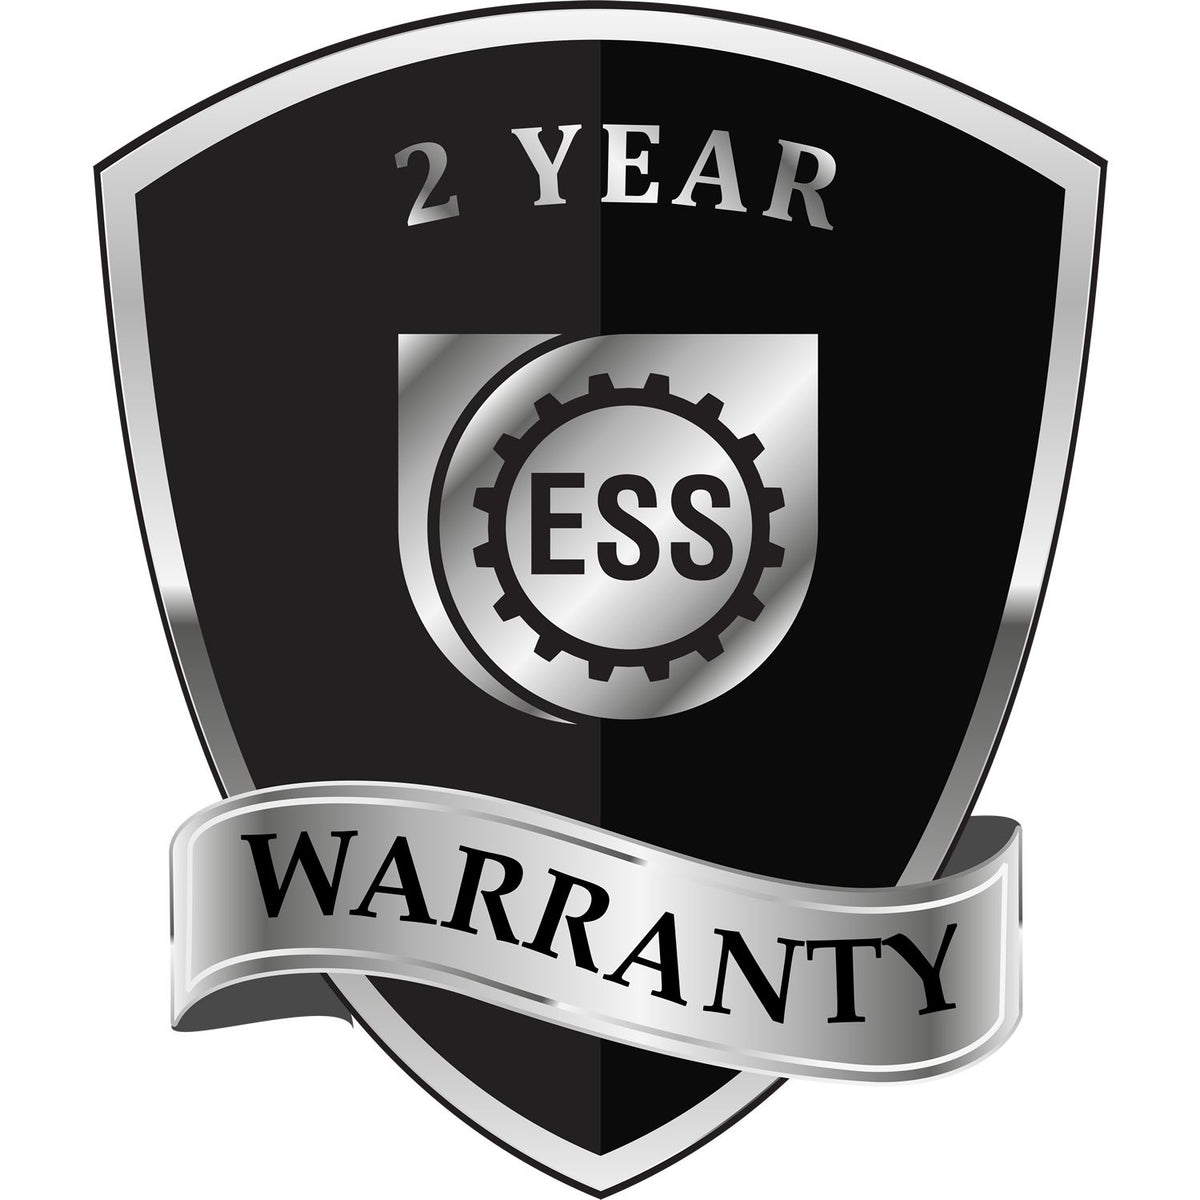 A black and silver badge or emblem showing warranty information for the Hybrid North Carolina Engineer Seal